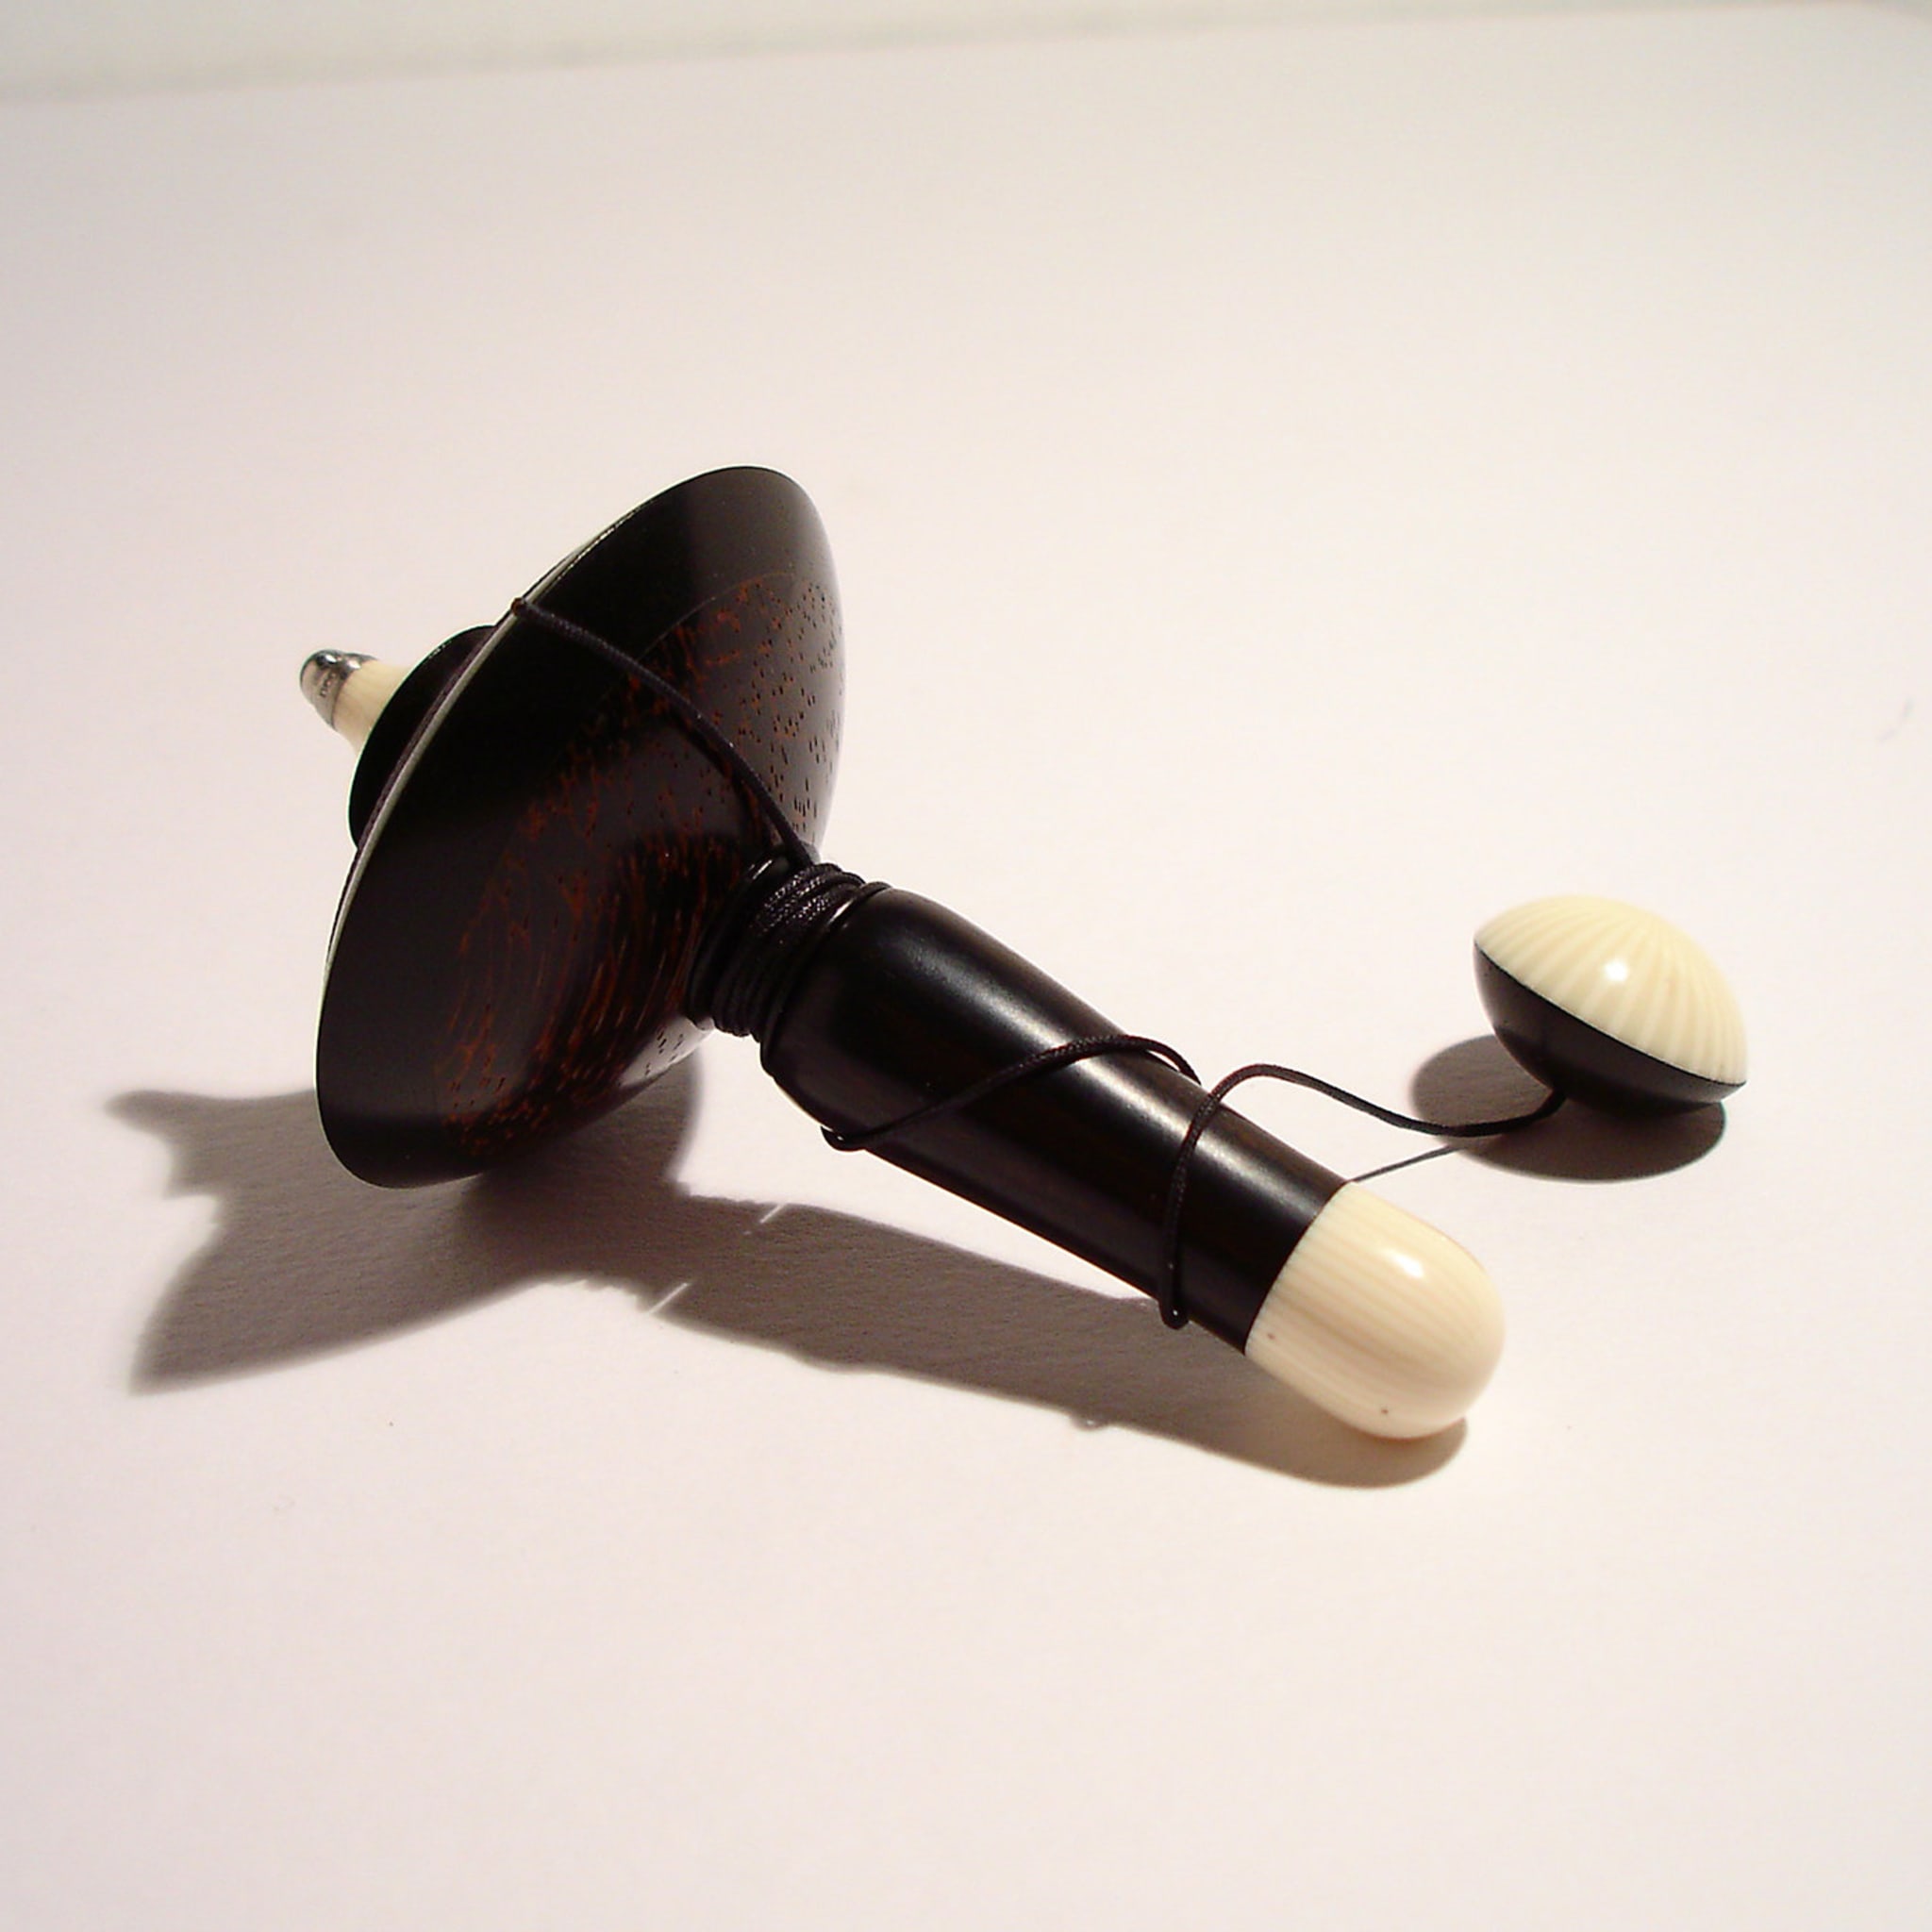 Filo Spinning Top in Ebony, Galalith and Black Palm - Alternative view 3